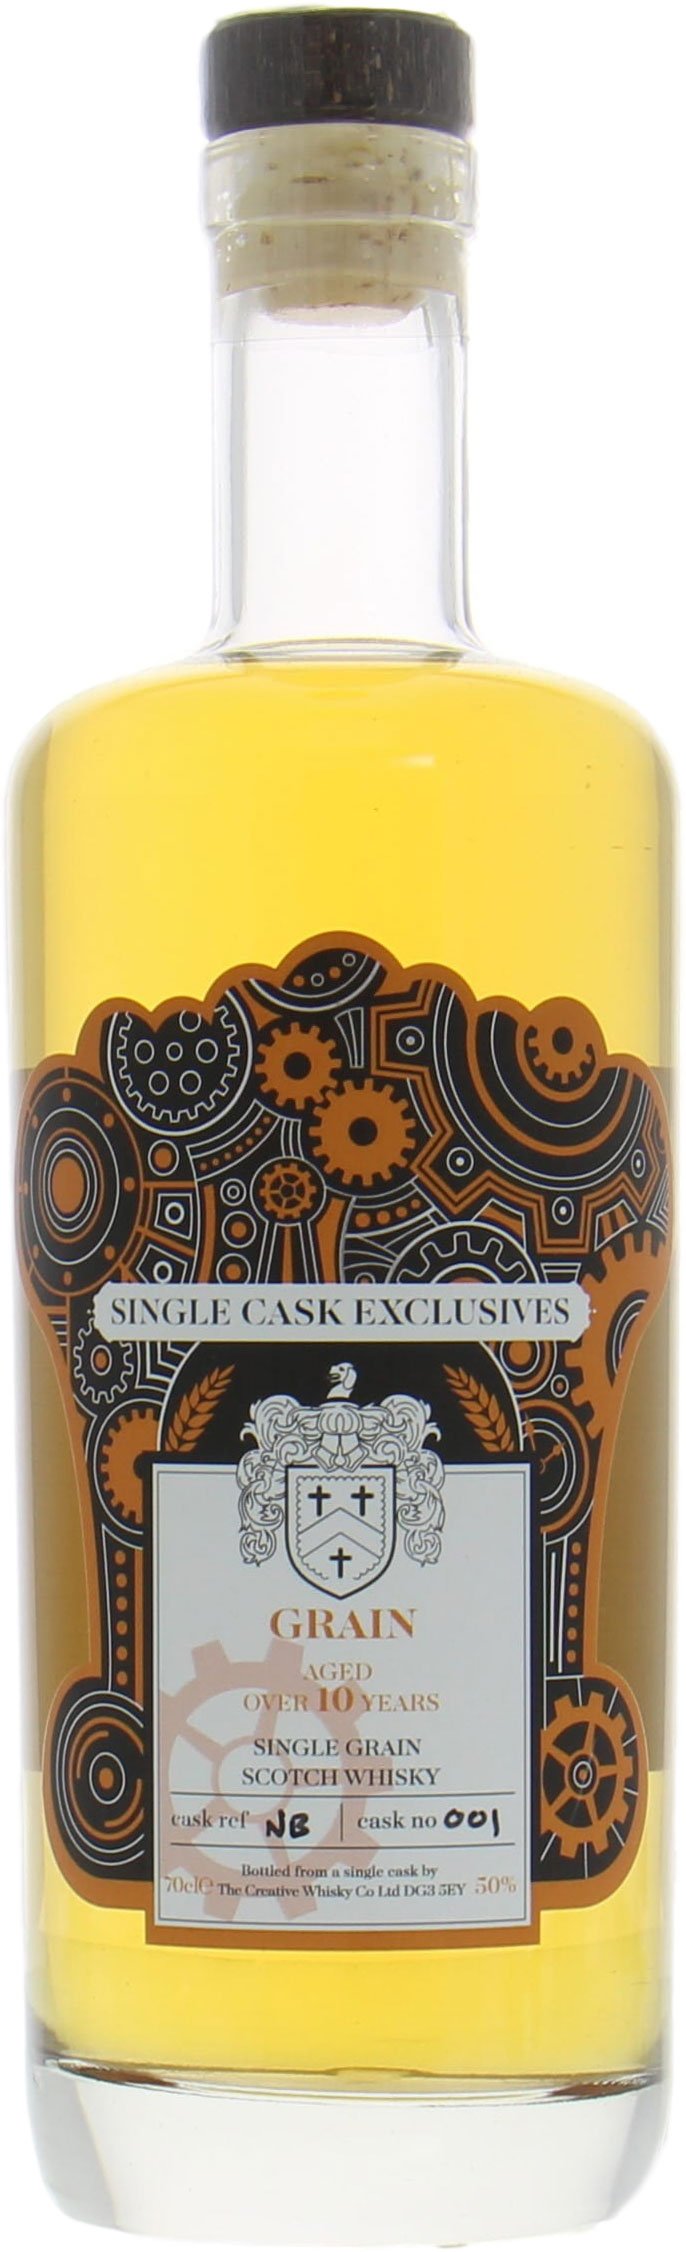 Grain - 10 Years Old Creative Whisky Company Single Cask Exclusives cask:NB001 50% NV Perfect